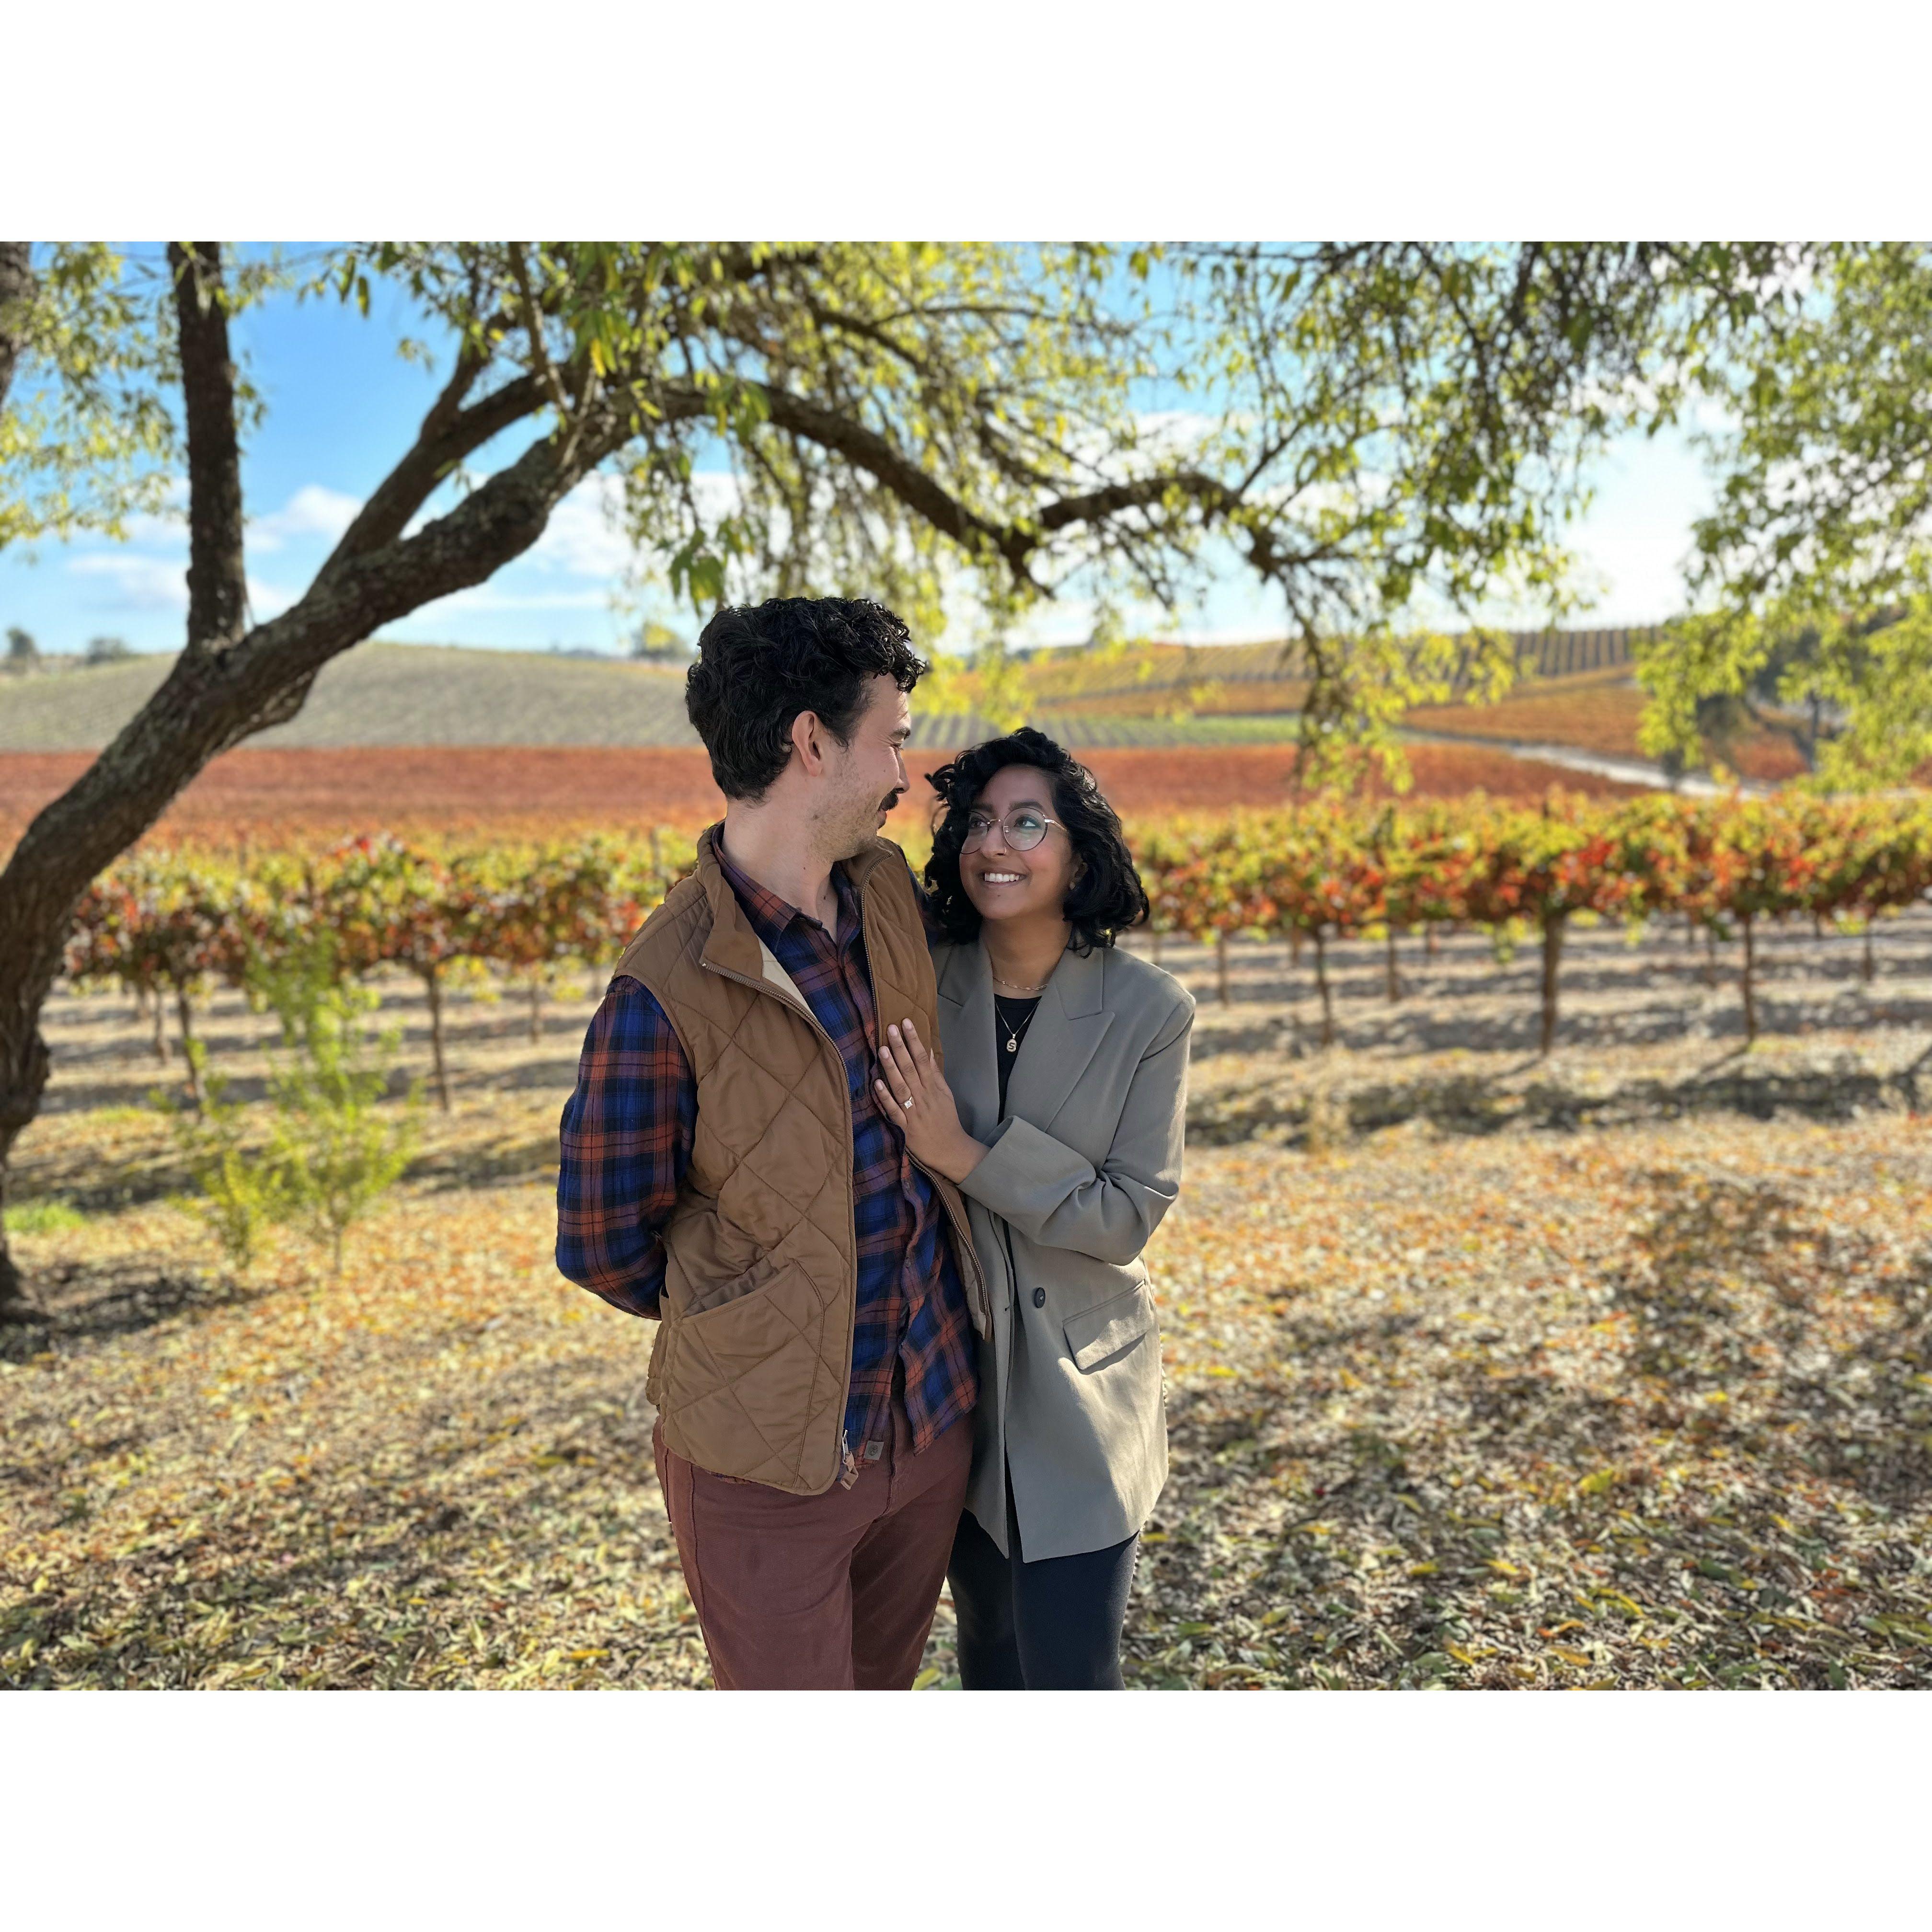 Engagement day! Chris was carrying the ring all weekend on a trip to our favorite spot - Paso Robles & San Luis Obispo, waiting for the perfect moment. Once he saw this vineyard, he knew!